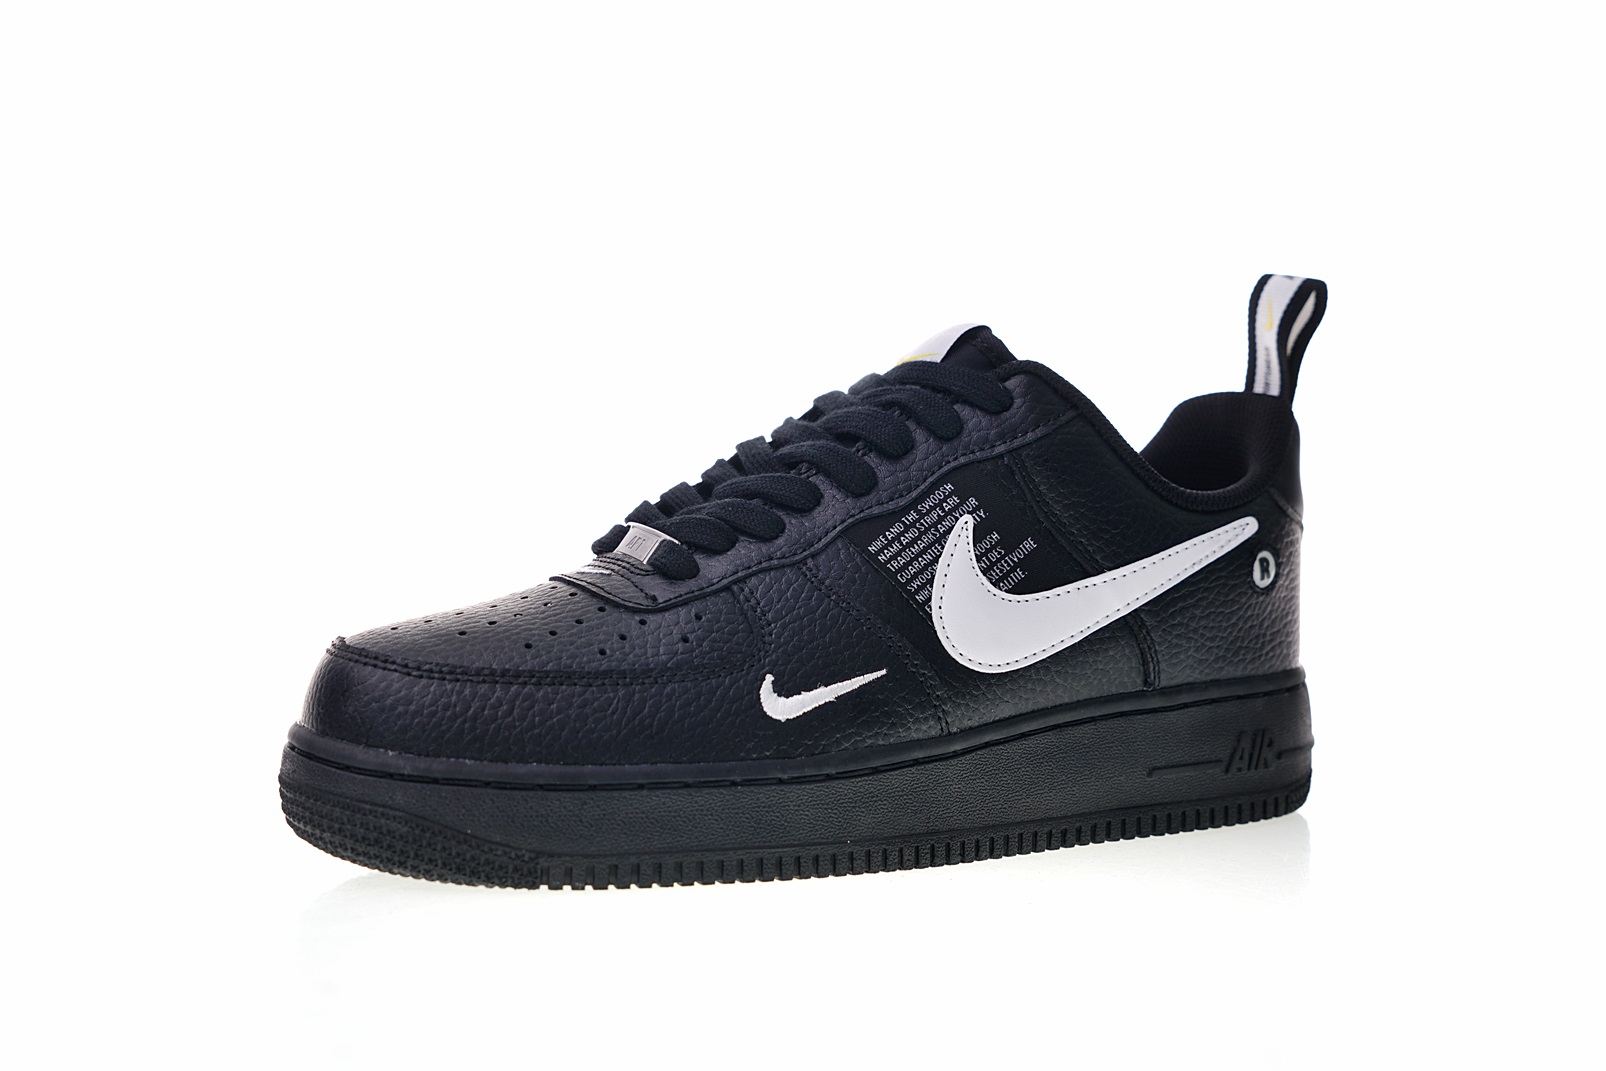 Seguir Física meteorito nike legend trainer gray and yellow color chart - Zapasgo - Nike Air Force  1 07 LV8 Utility Negro